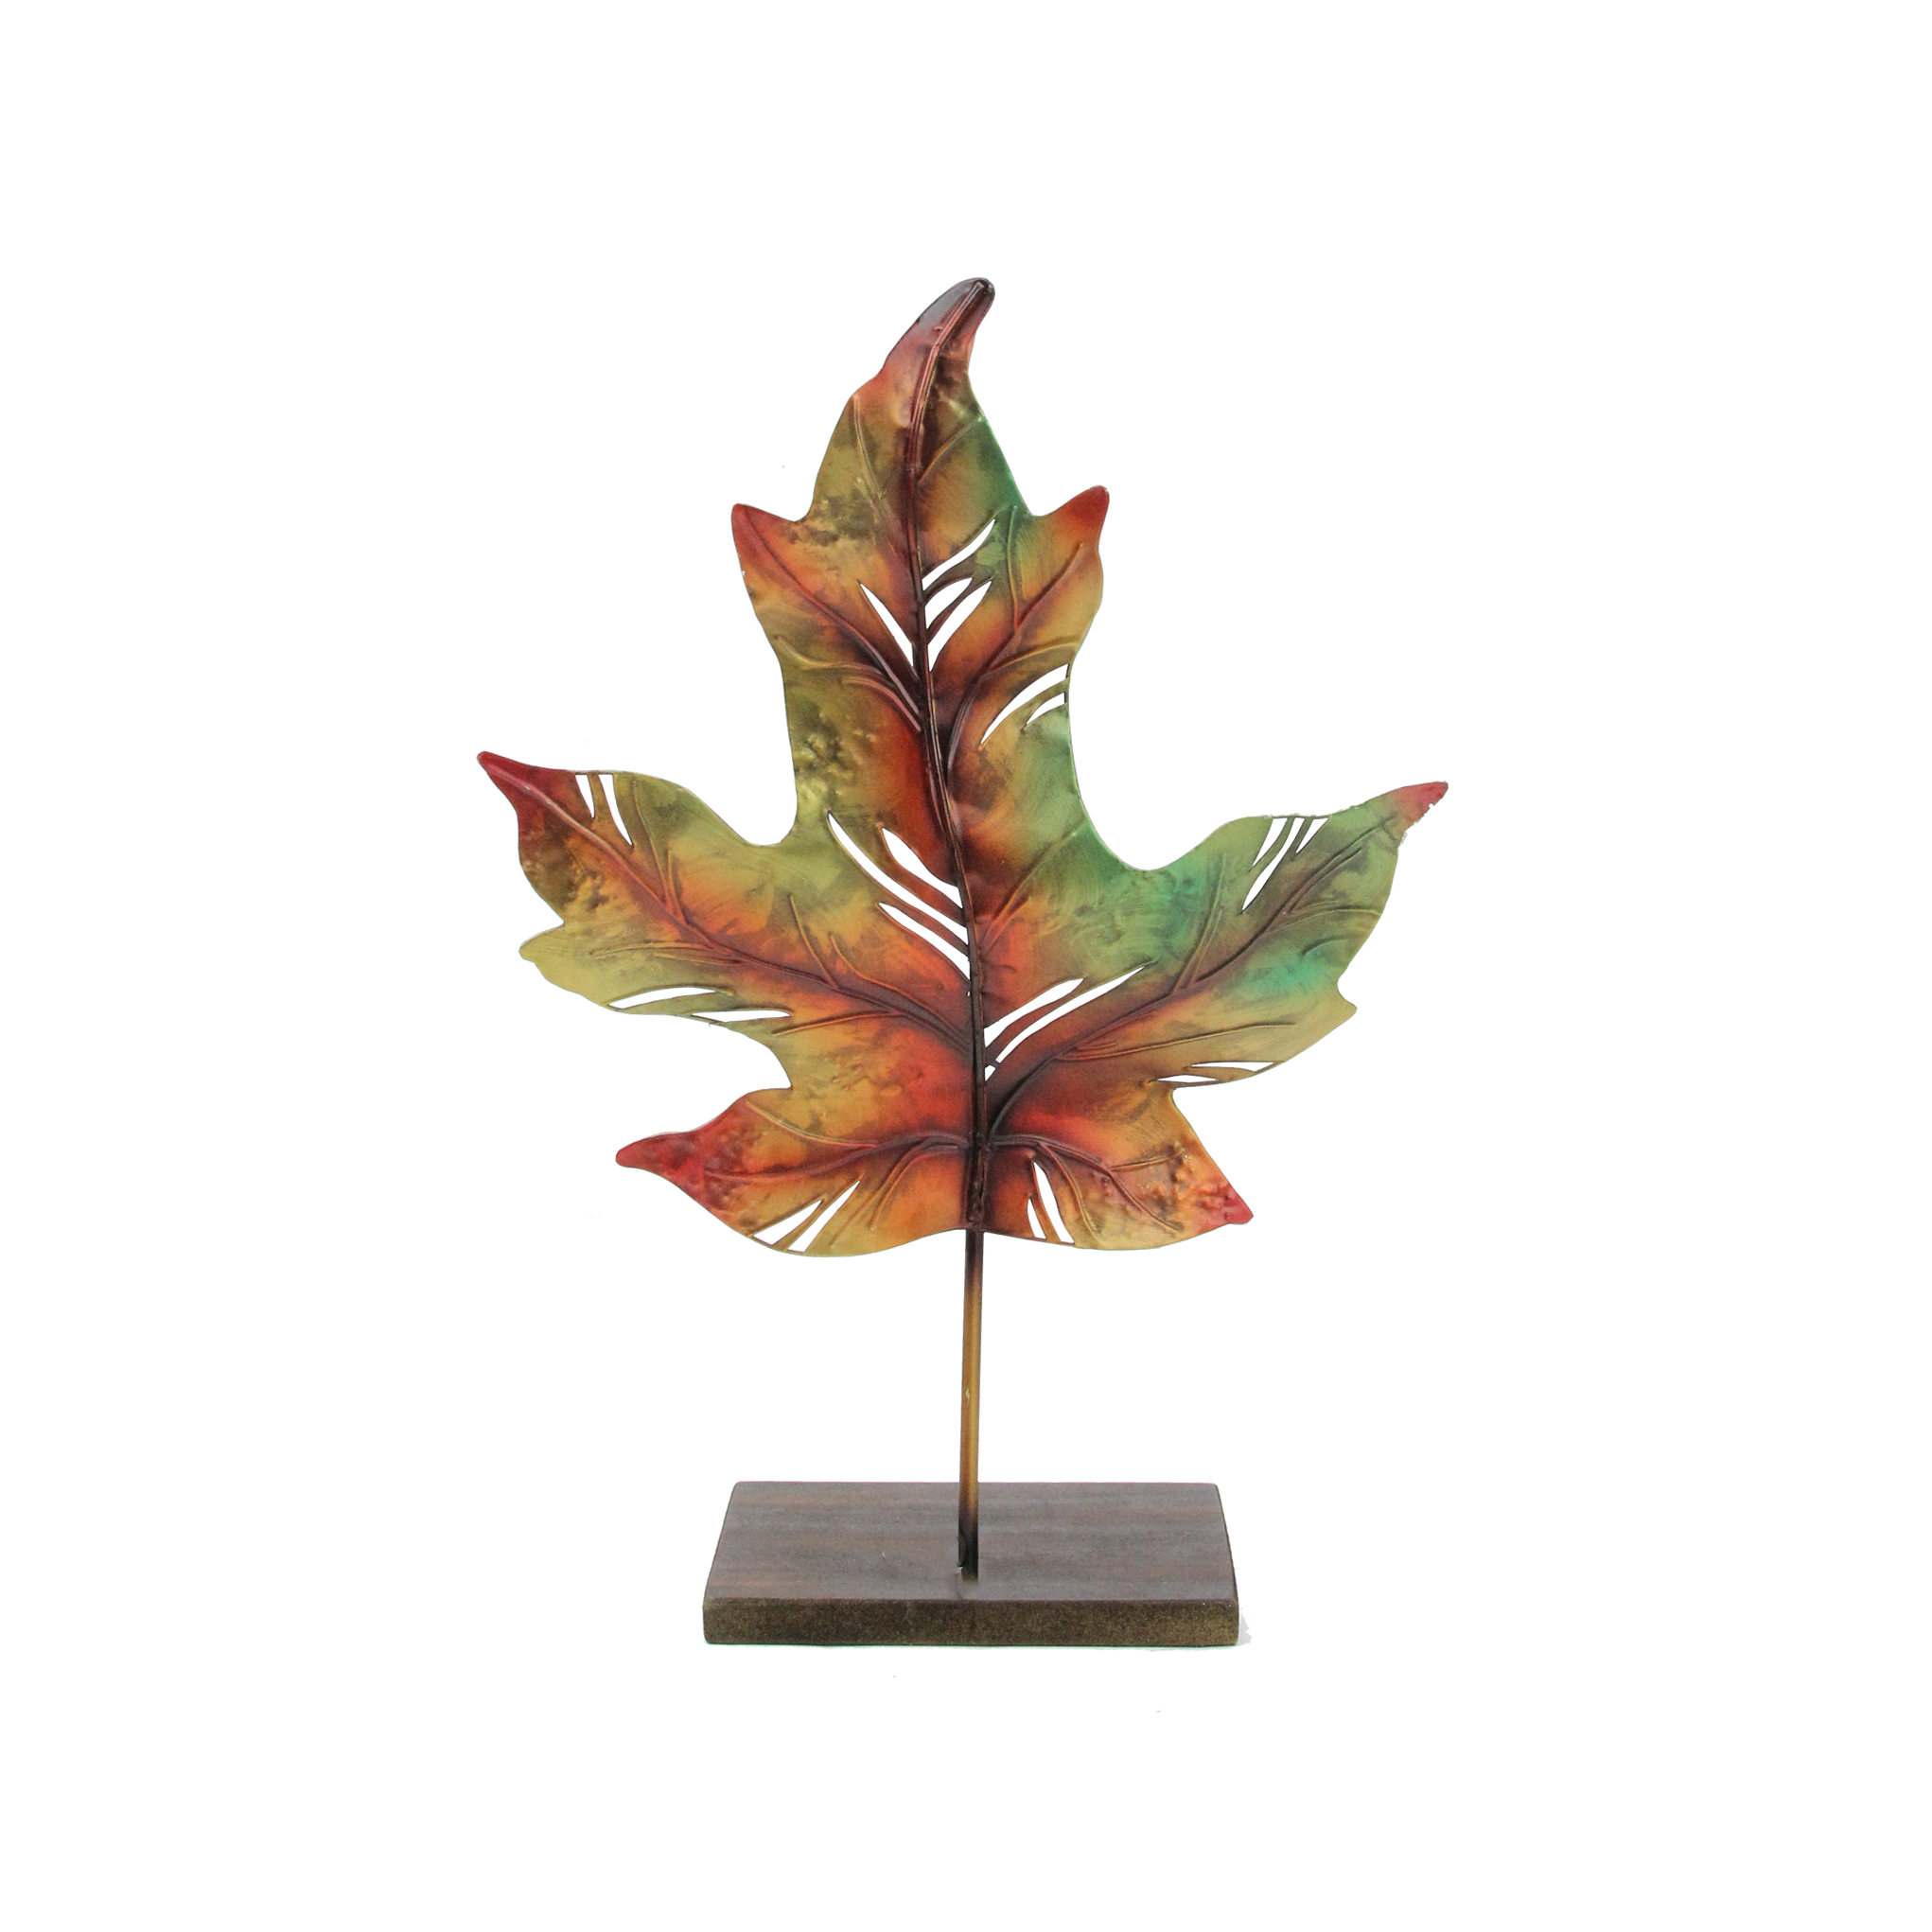 Roman 14" Green and Brown Autumn Maple Leaf Votive Candle Holder